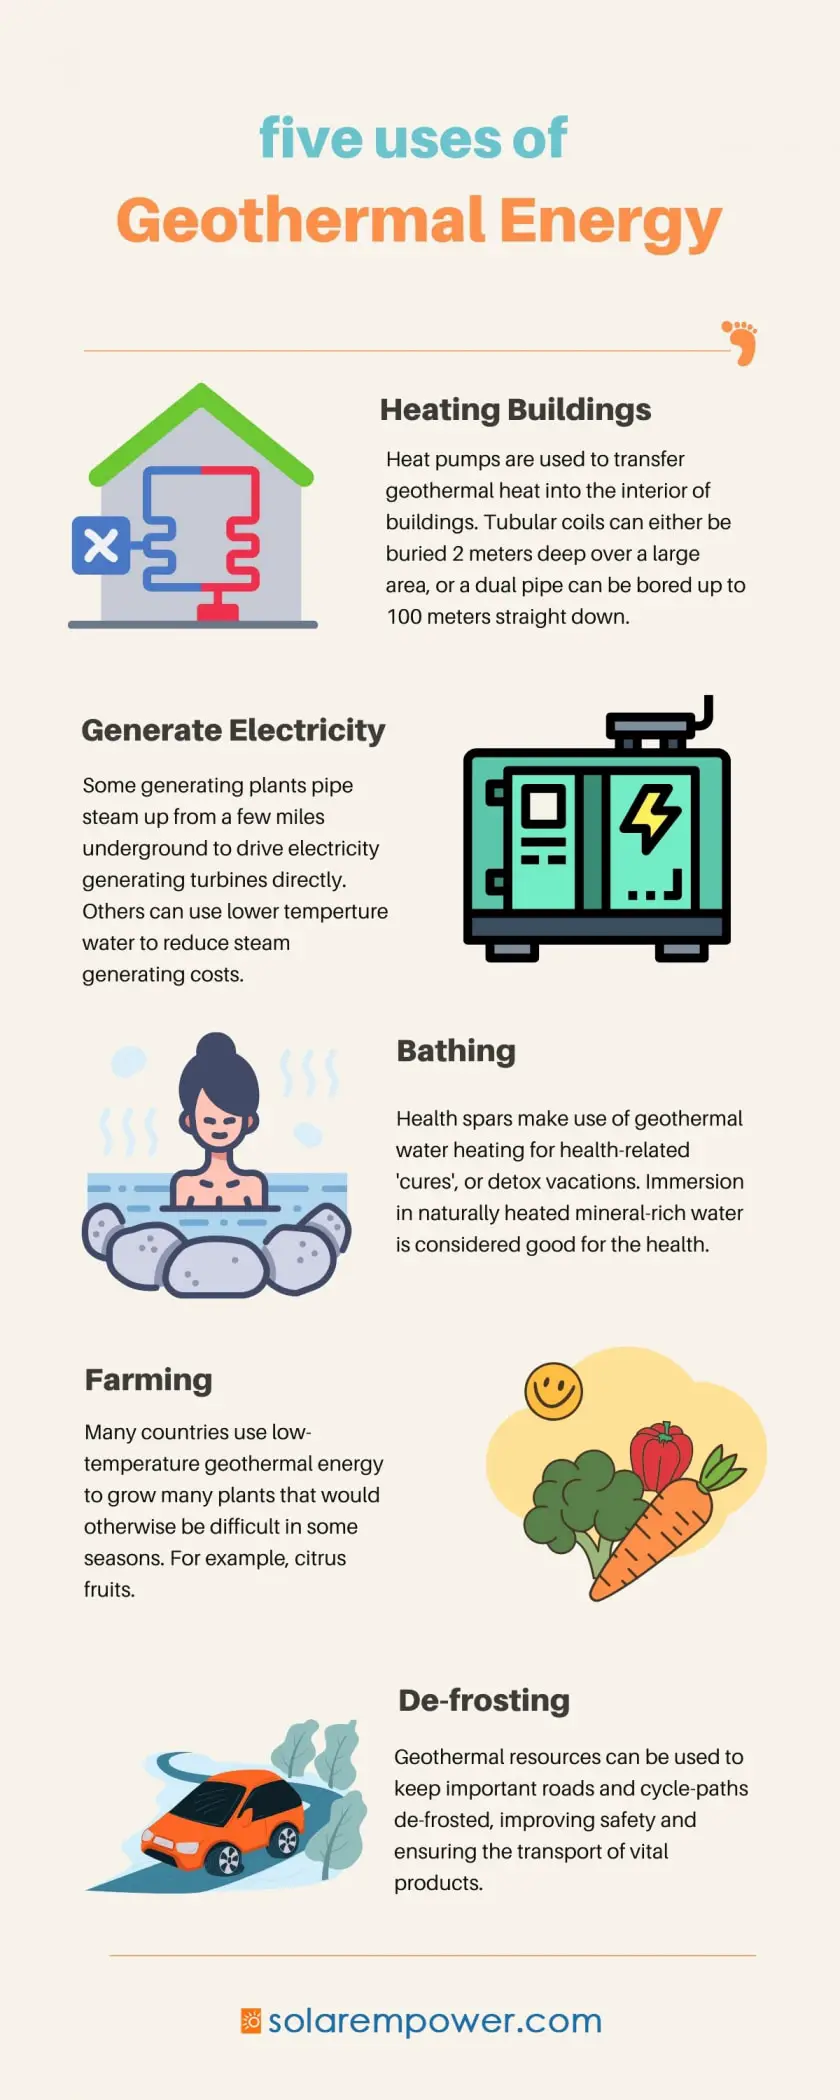 5 uses of geothermal energy – Infographic